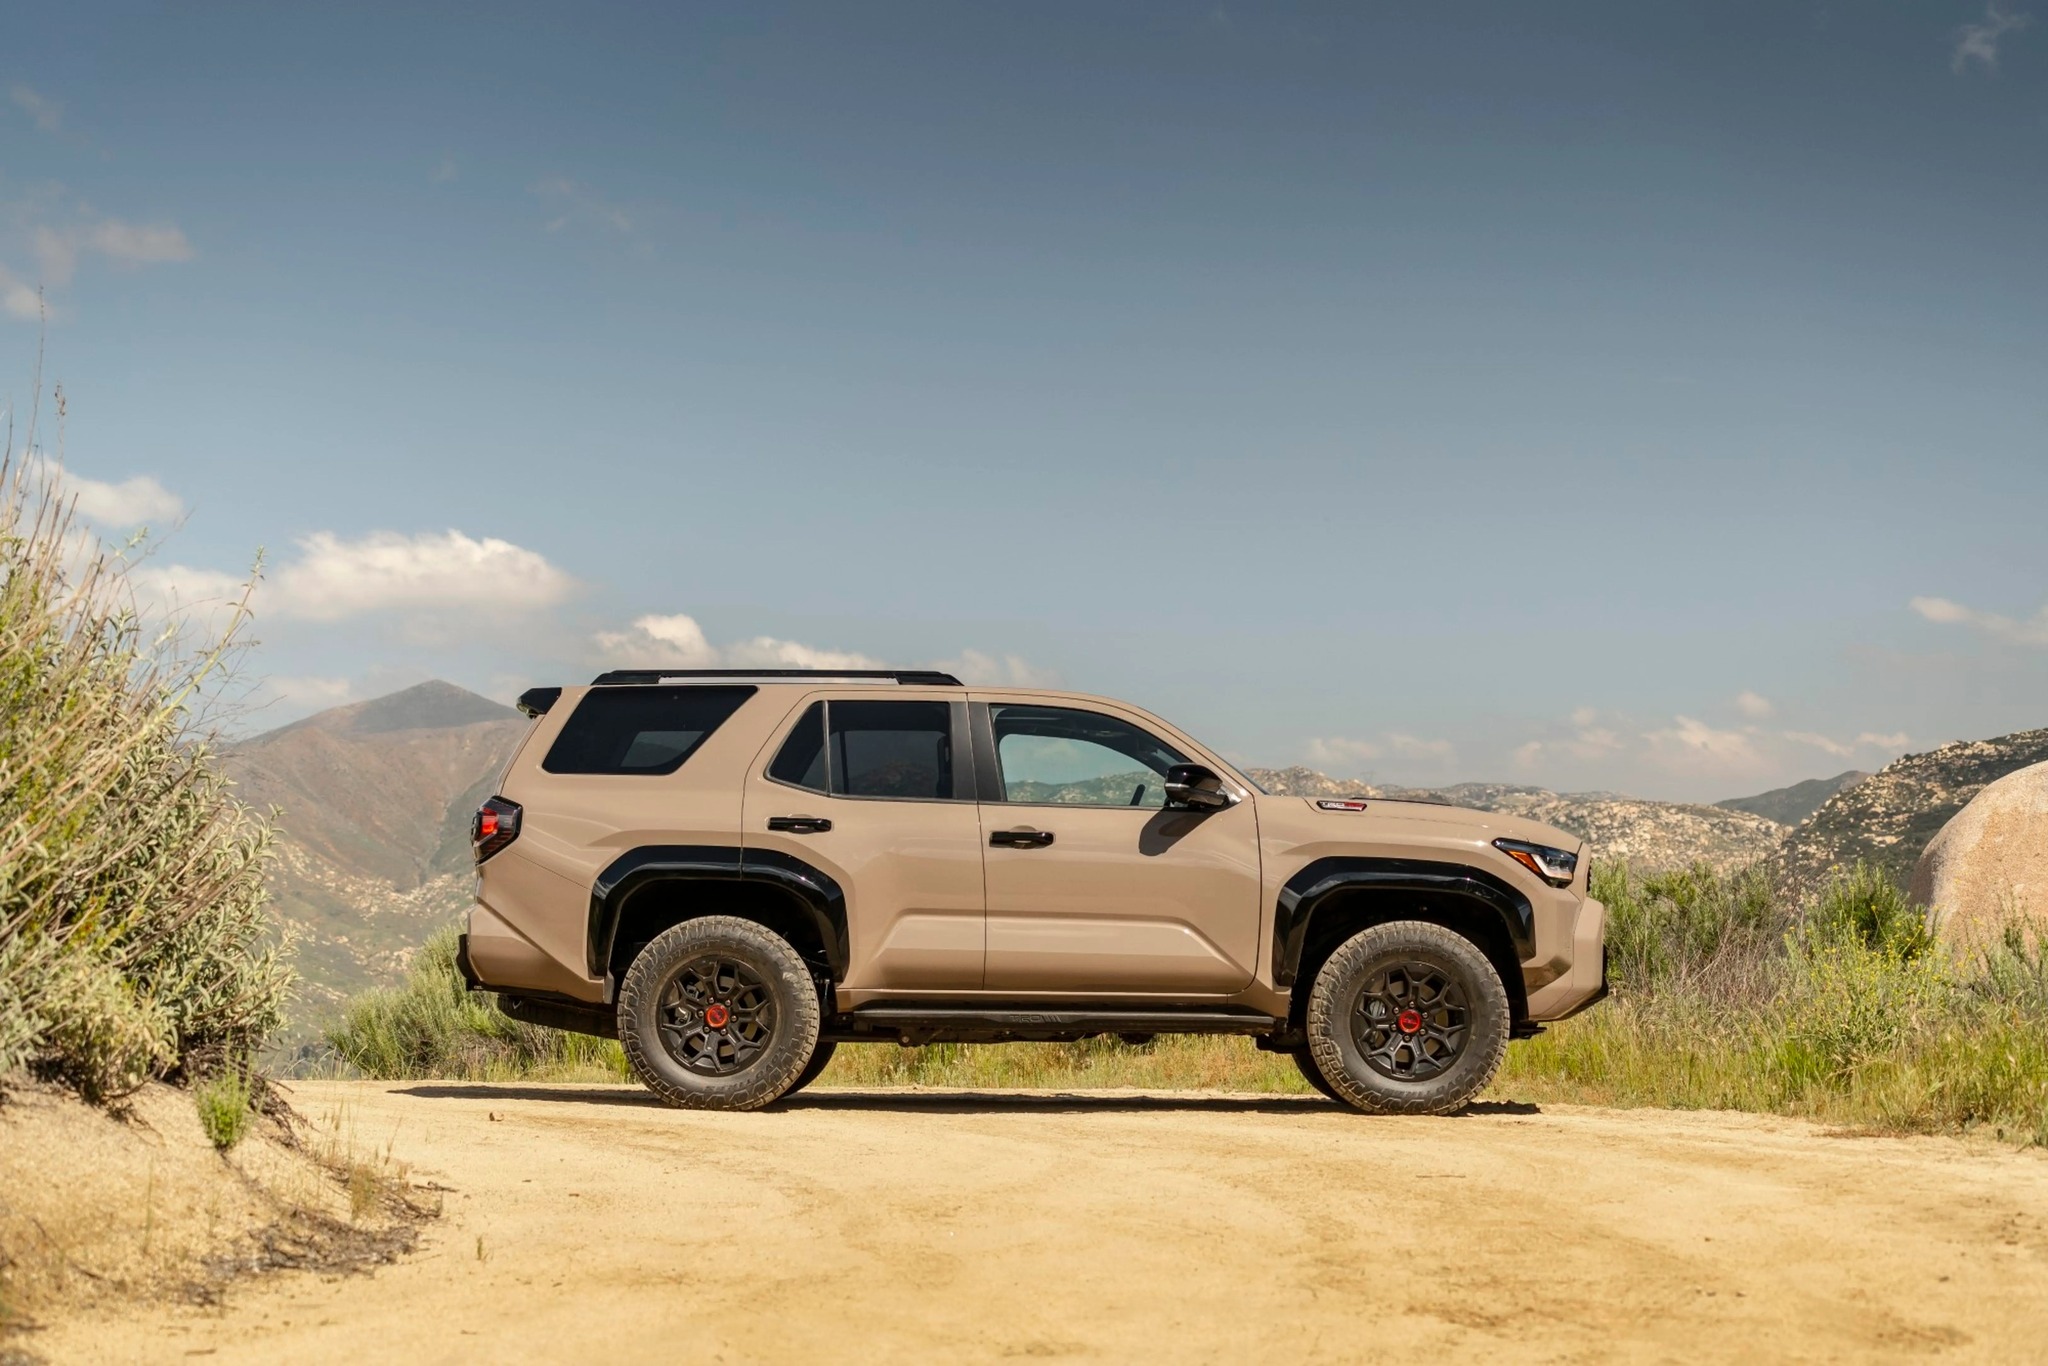 2025 Toyota 4runner 2025 4Runner Photos & Specs! 🔥 Trailhunter, TRD Pro, Off-Road, Limited Trims 2025 Toyota 4Runner Wallpapers 1